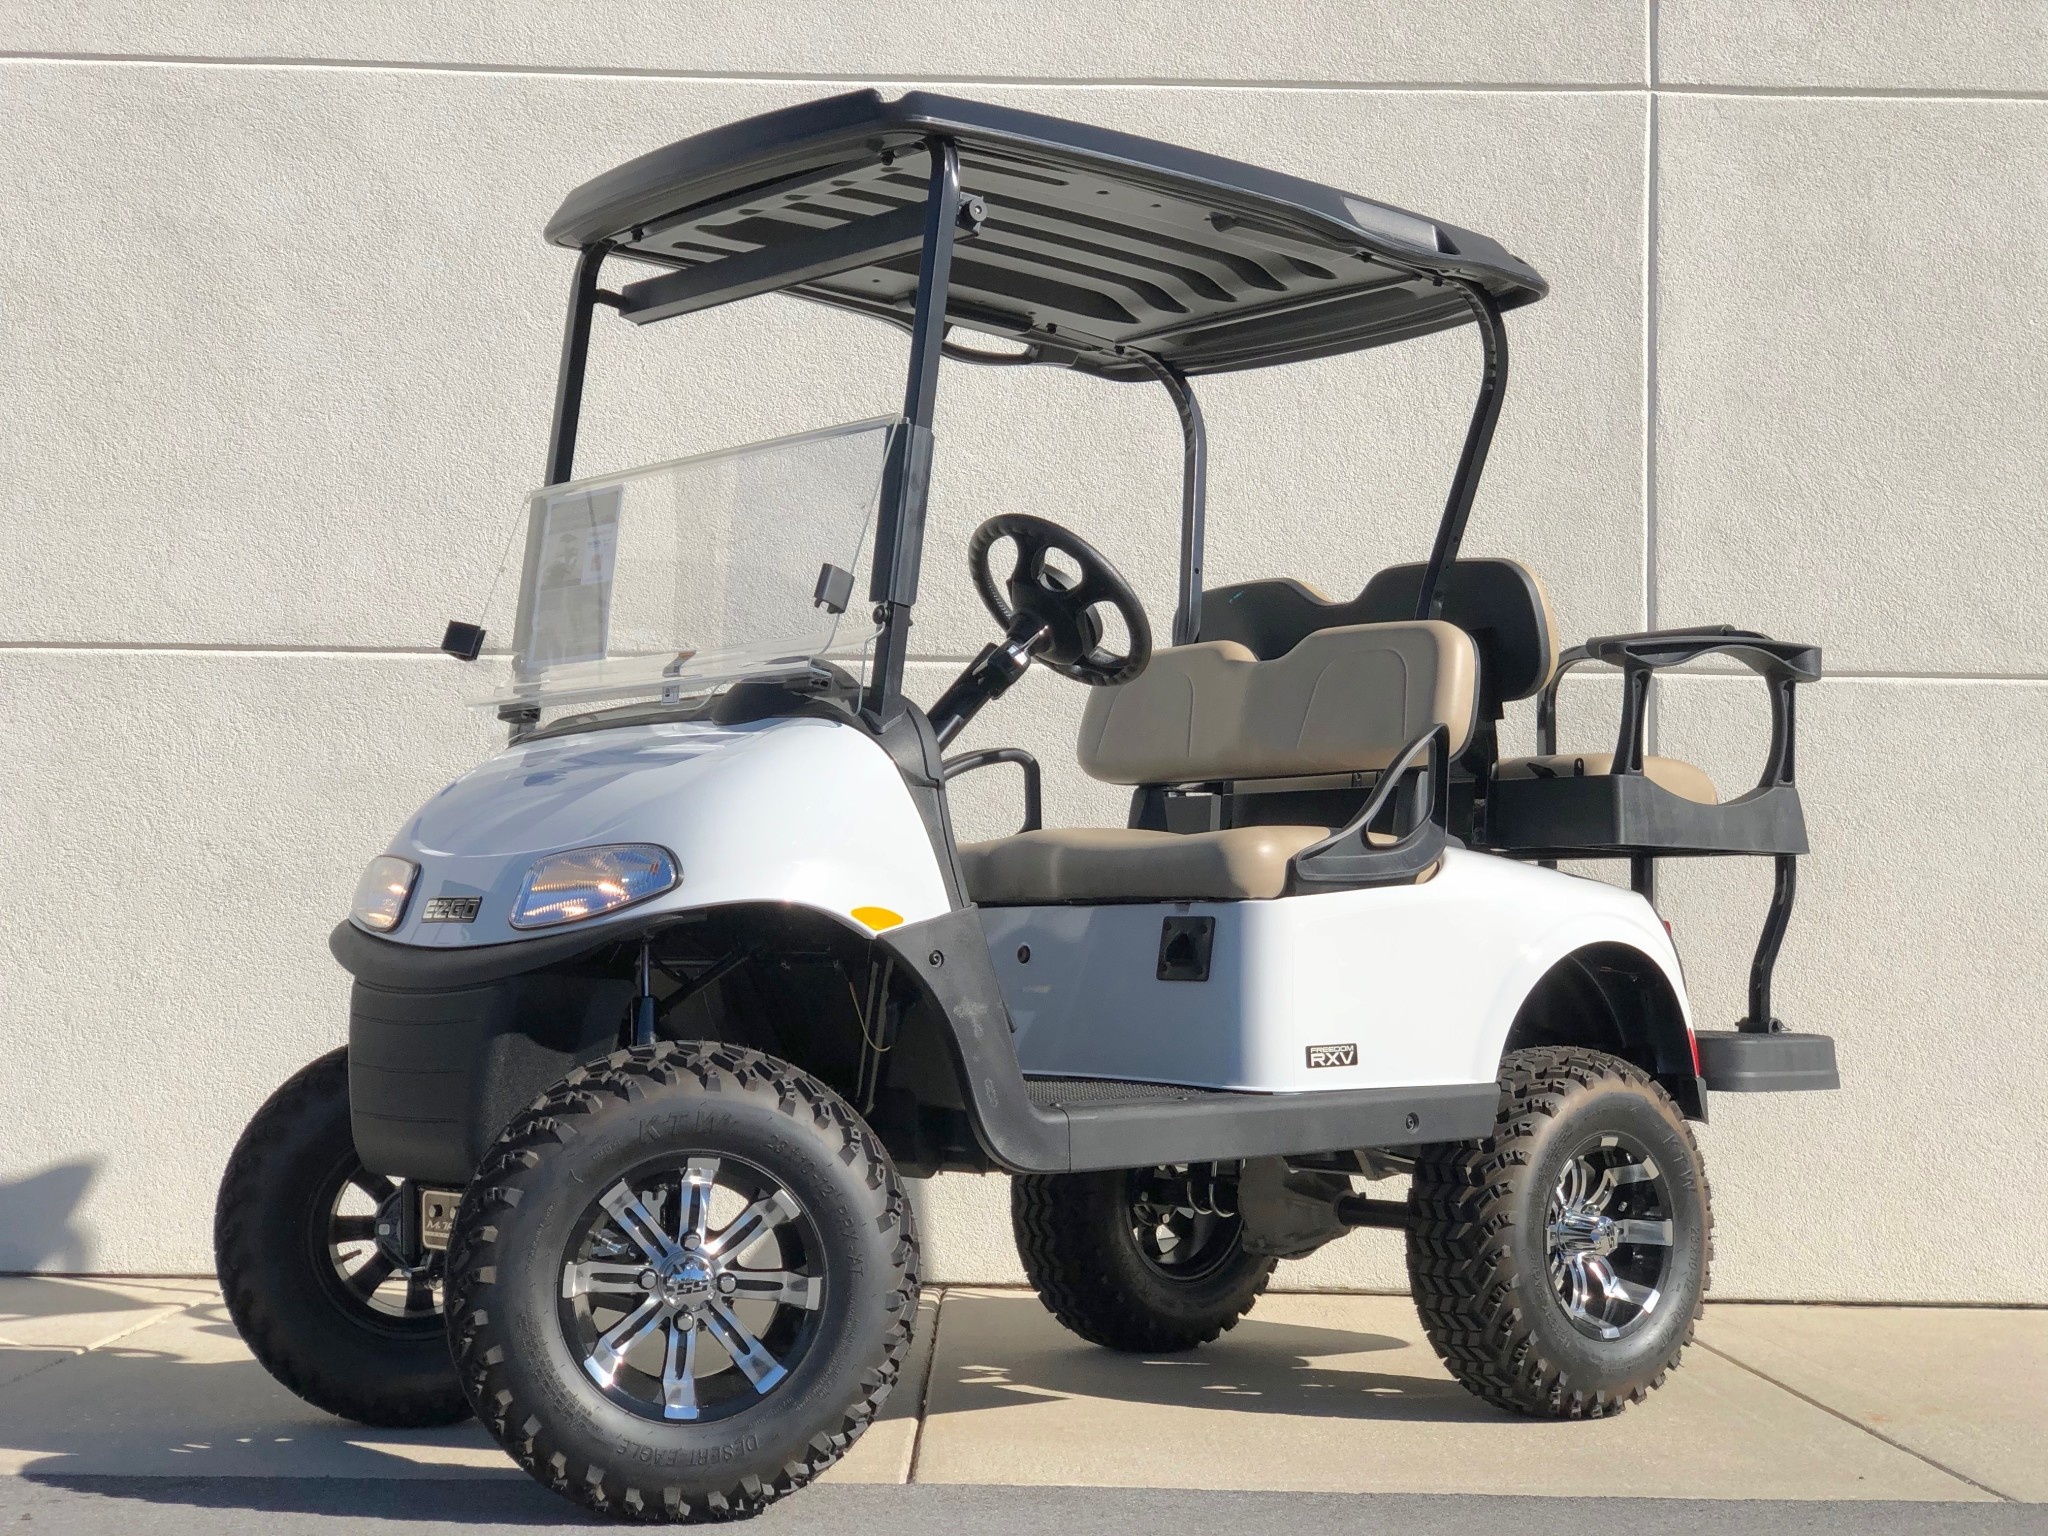 Street Legal EZGO Golf Carts. Gas and Electric powered. Dixielectricar